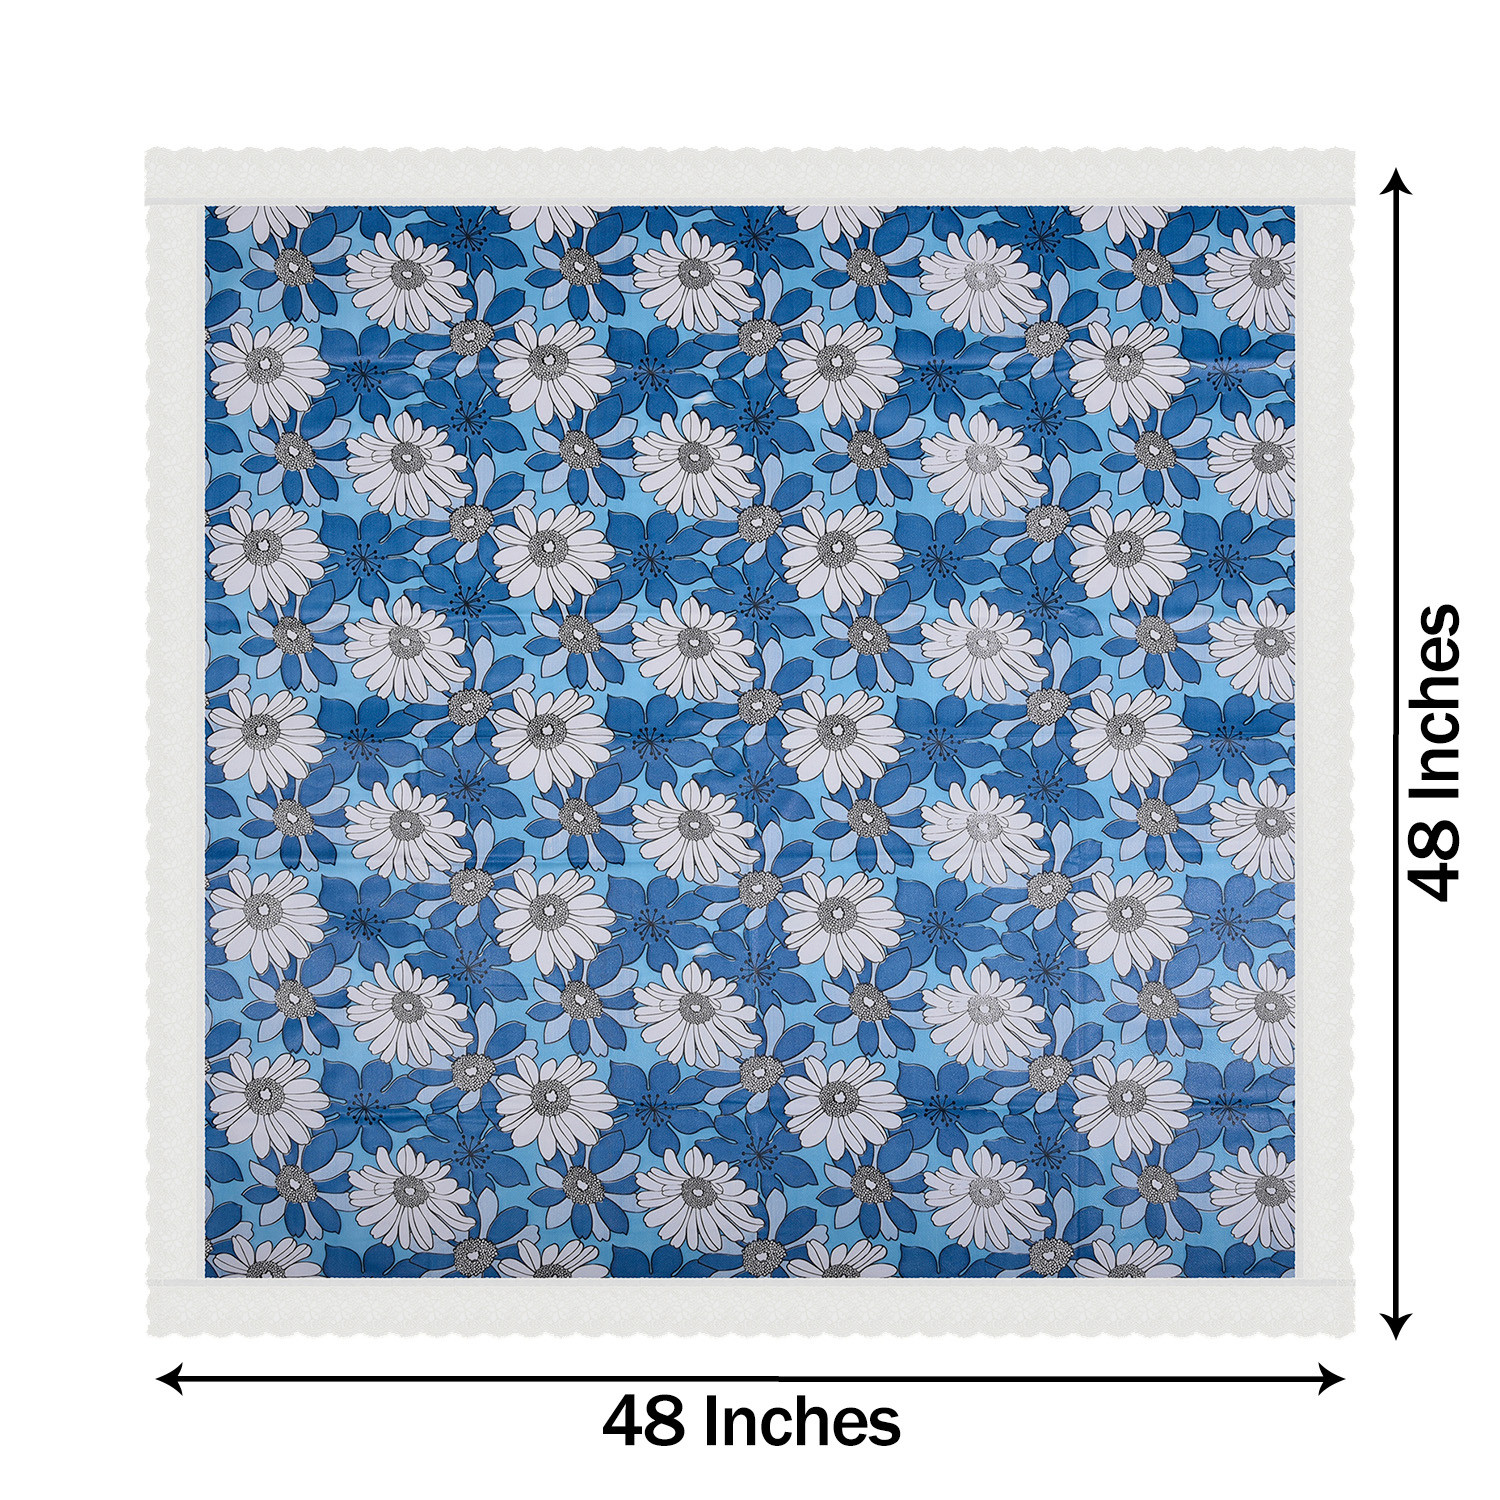 Kuber Industries Square Table Cover for 4 Seater|PVC Waterproof Flower Pattern Tablecloth Indoor & Outdoor|48x48 Inch (Sky Blue)